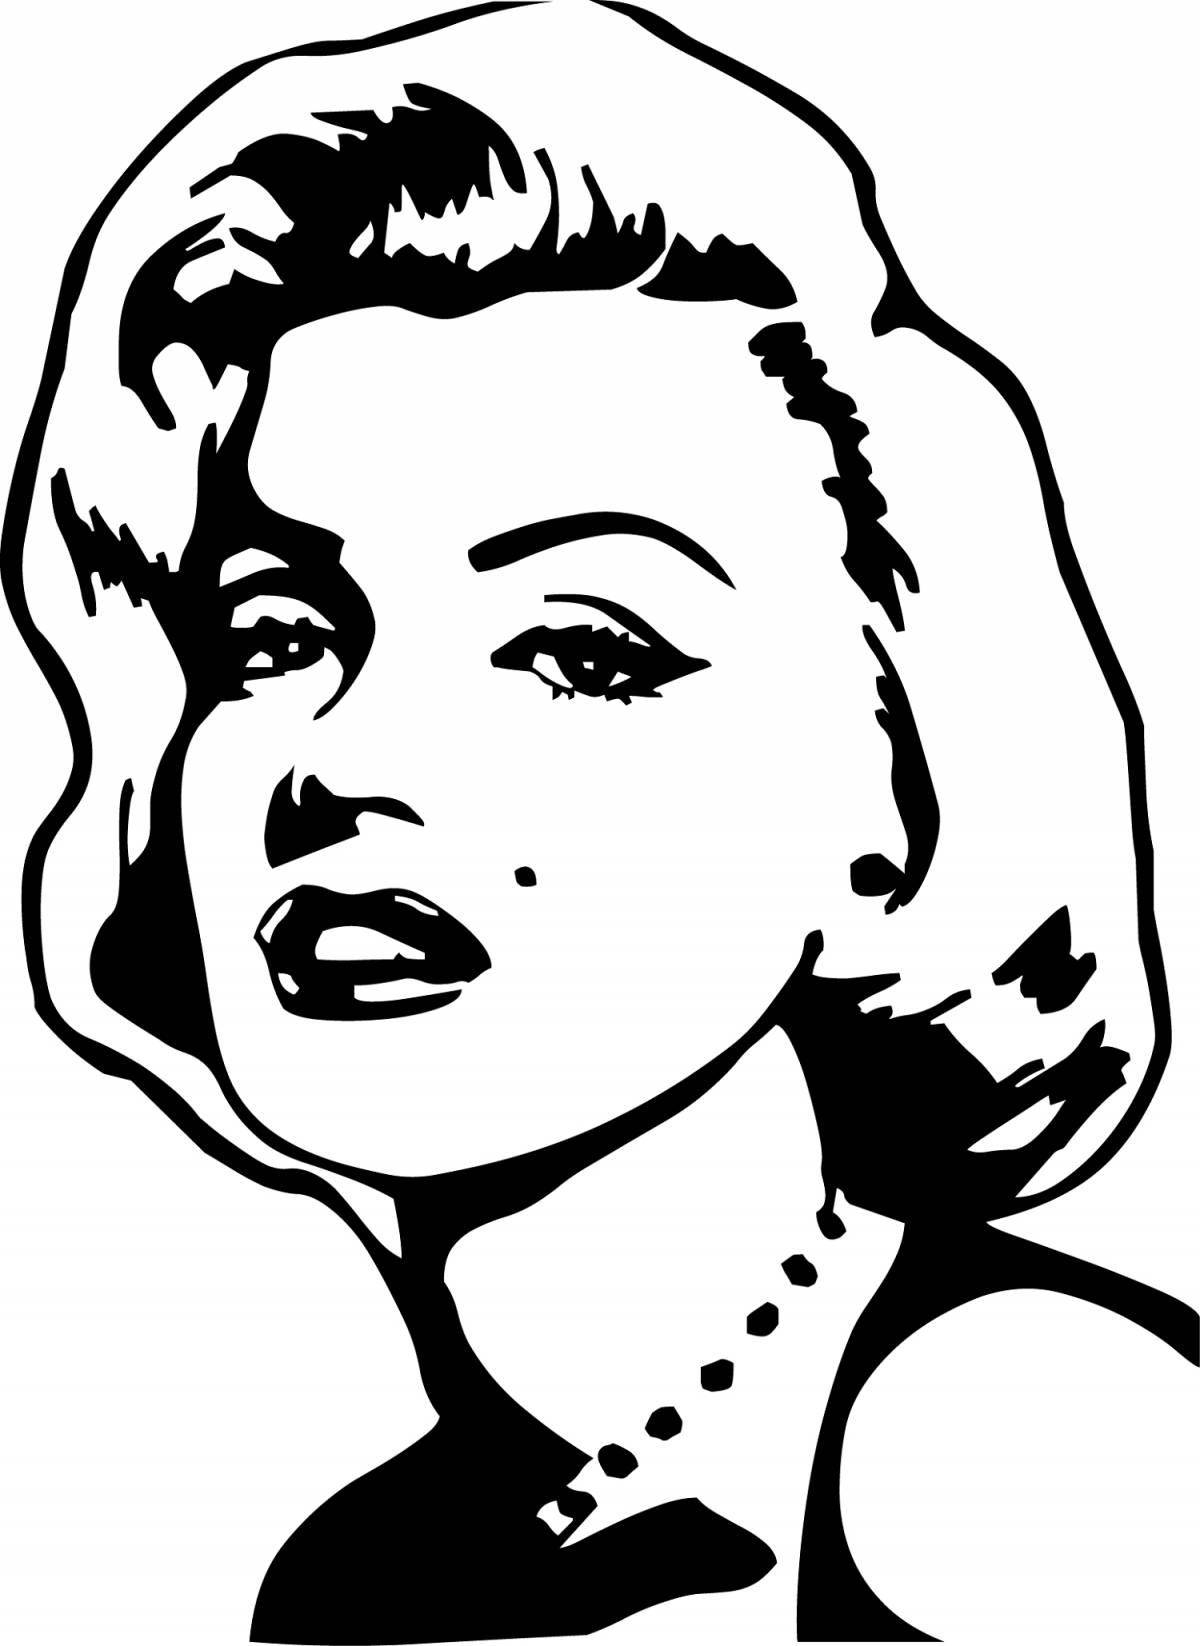 Marilyn Monroe coloring page filled with colors